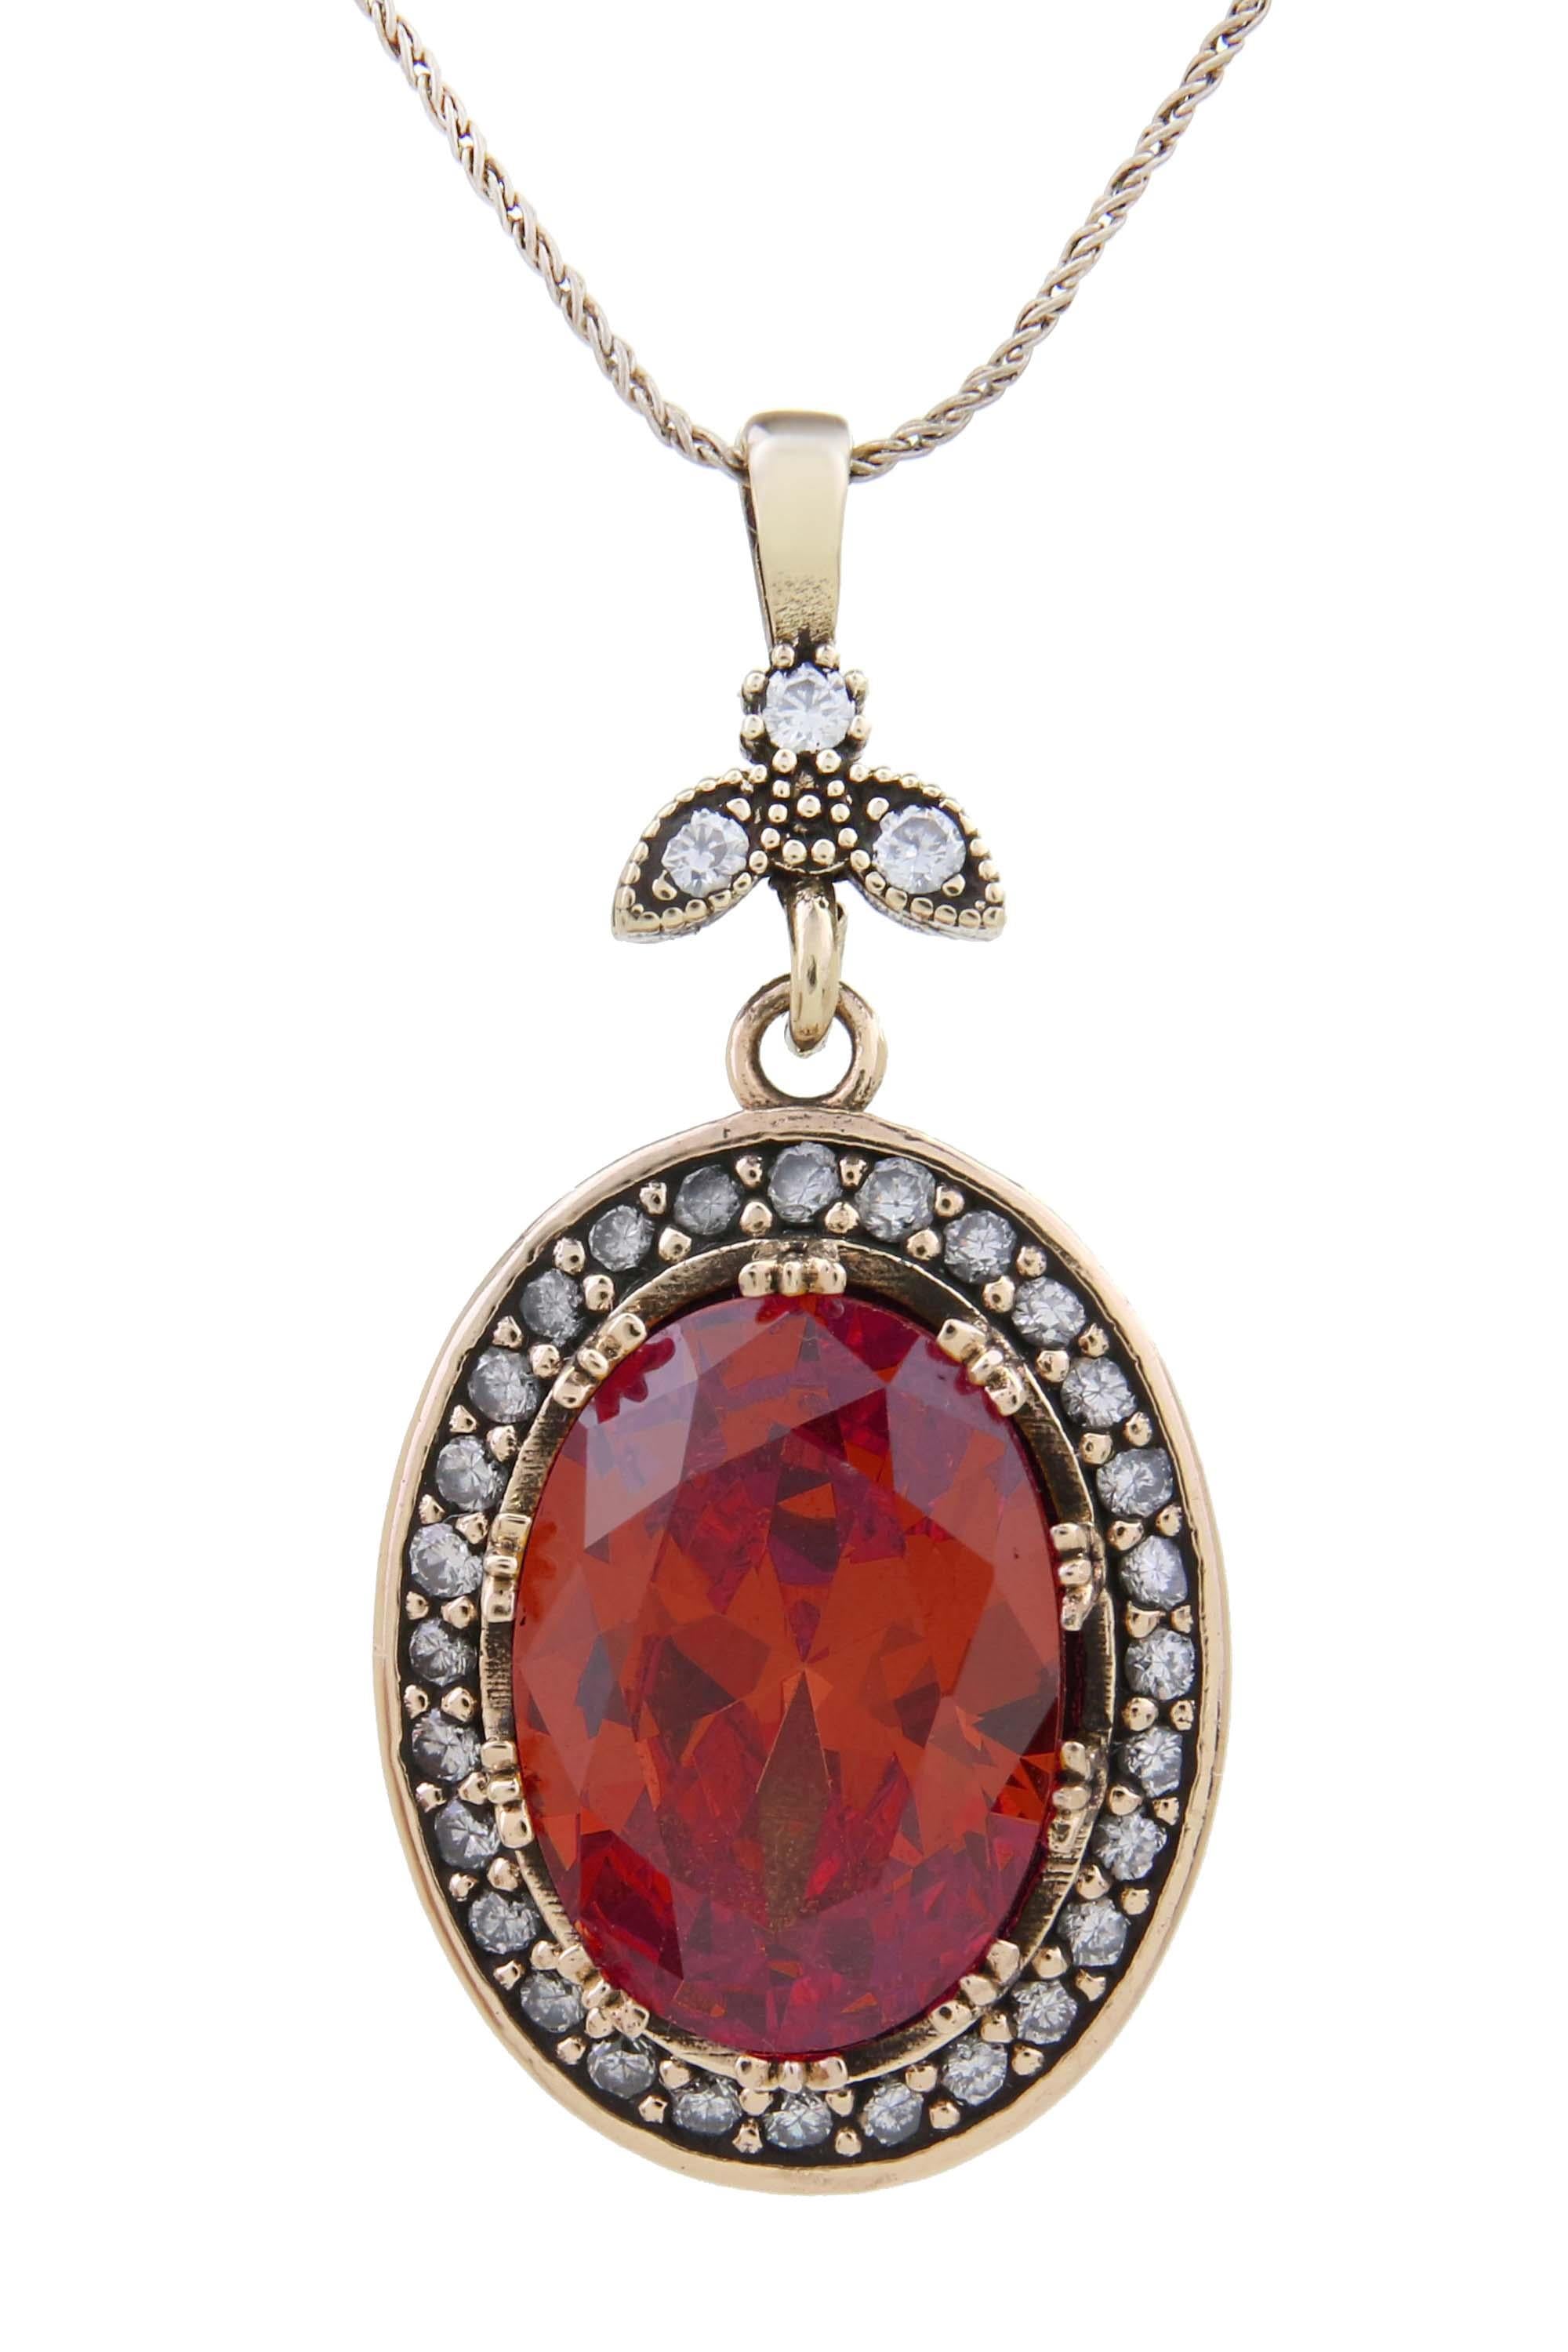 Authentic Series Red Garnet Stone Authentic Sterling Silver Women's  Necklace with Colorful Stones